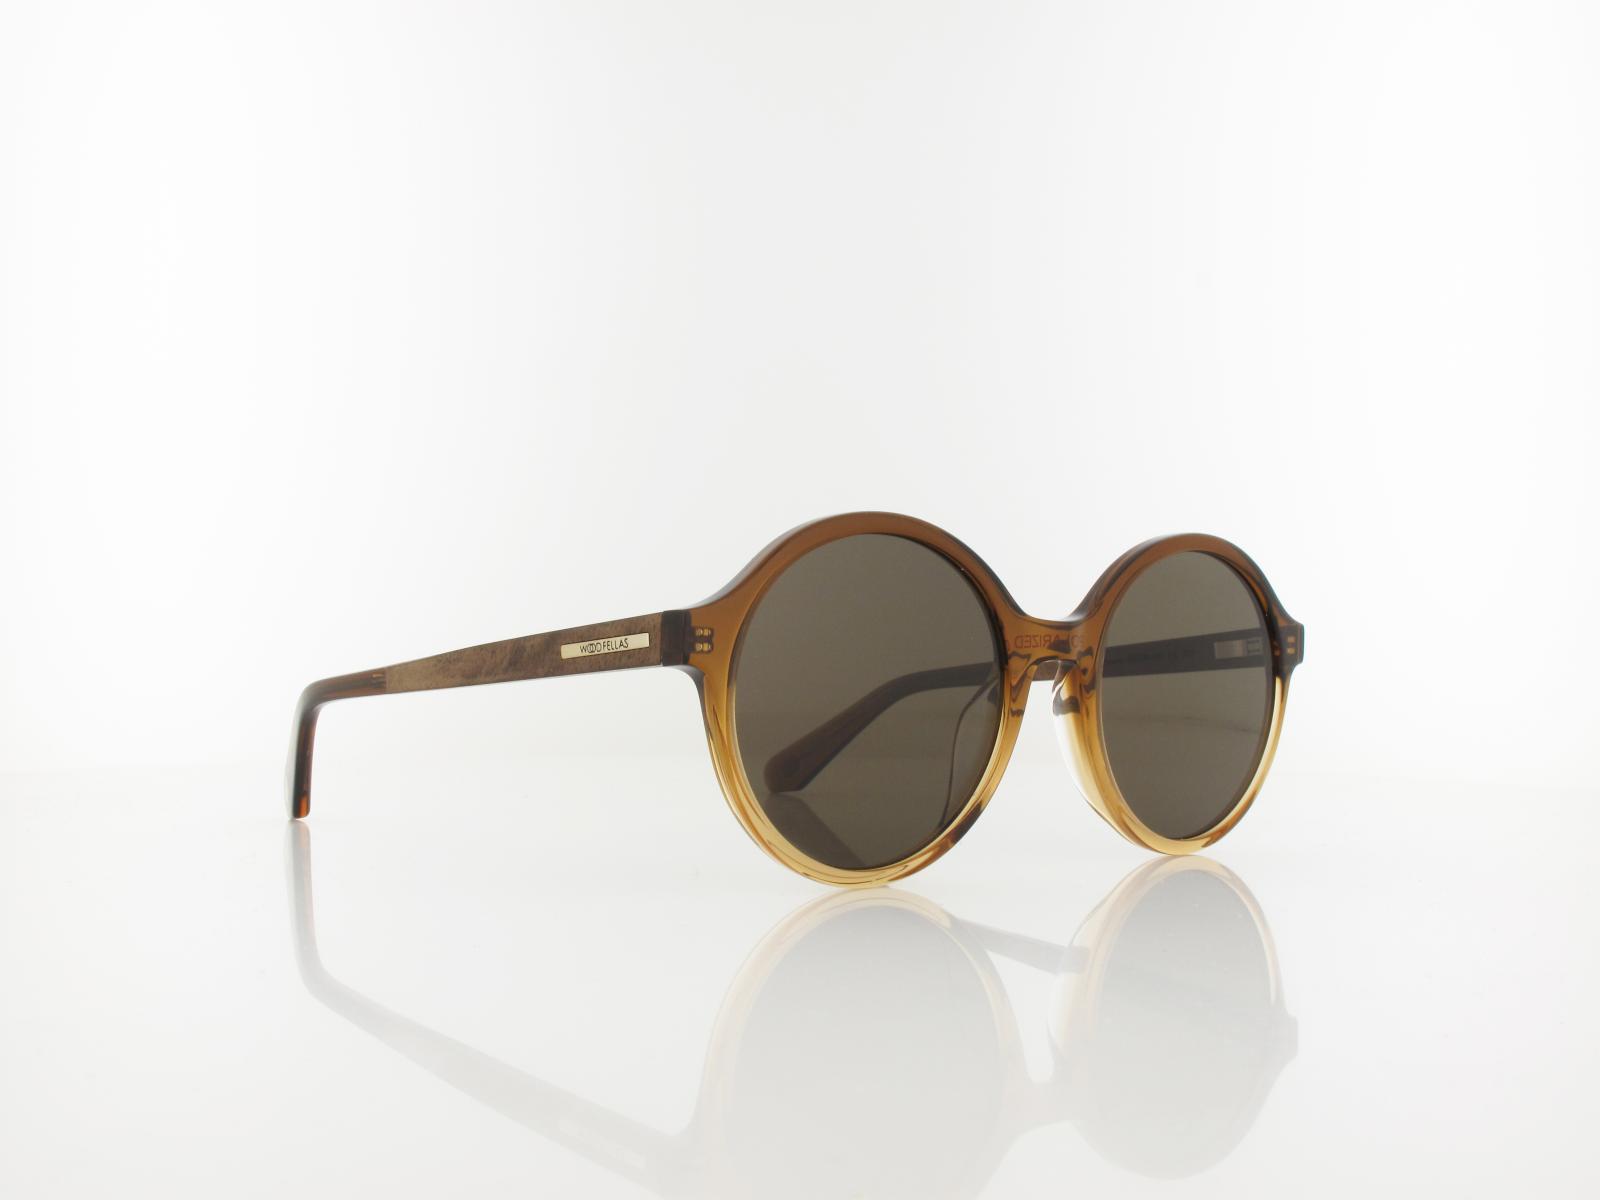 Wood Fellas | Switch Wood Acetate 11724 7074 51 | curled brown / grey brown polarized